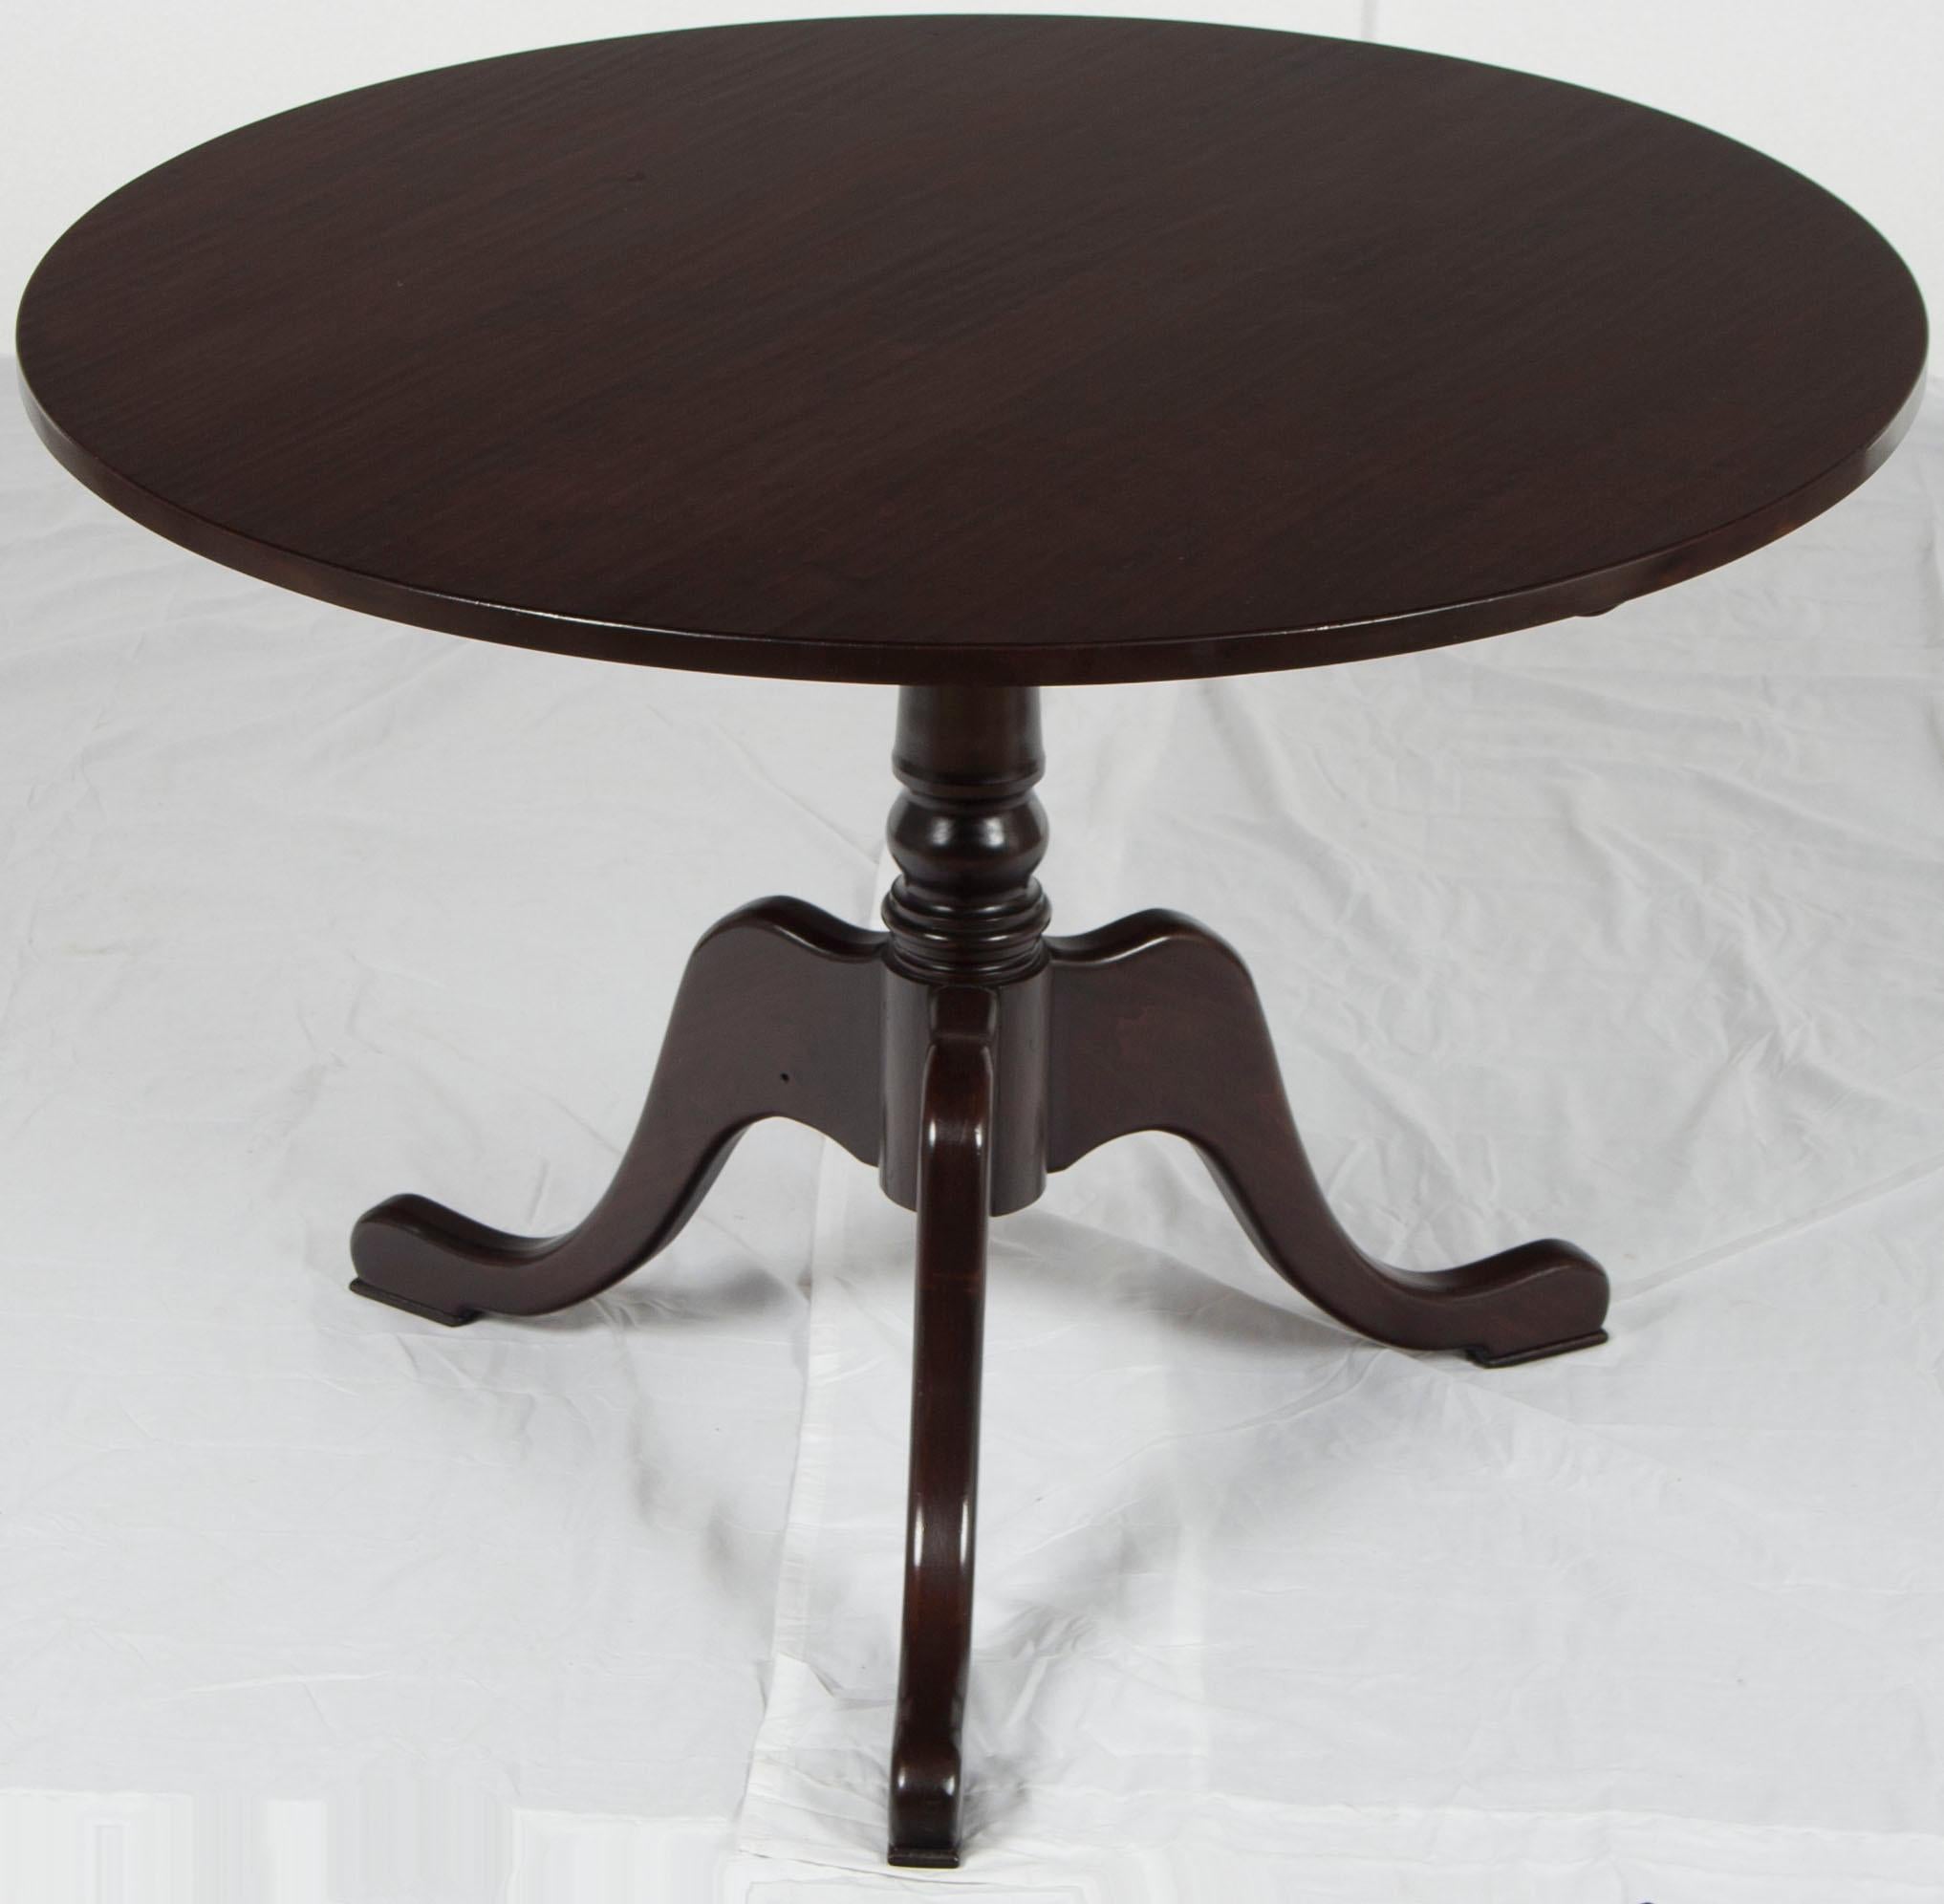 This English-made traditional style round tilt-top table provides a unique solution for tables in tight spaces. At only 42? in diameter it creates a table surface perfect for many functions. When not in use, the top can tilt up and the table can